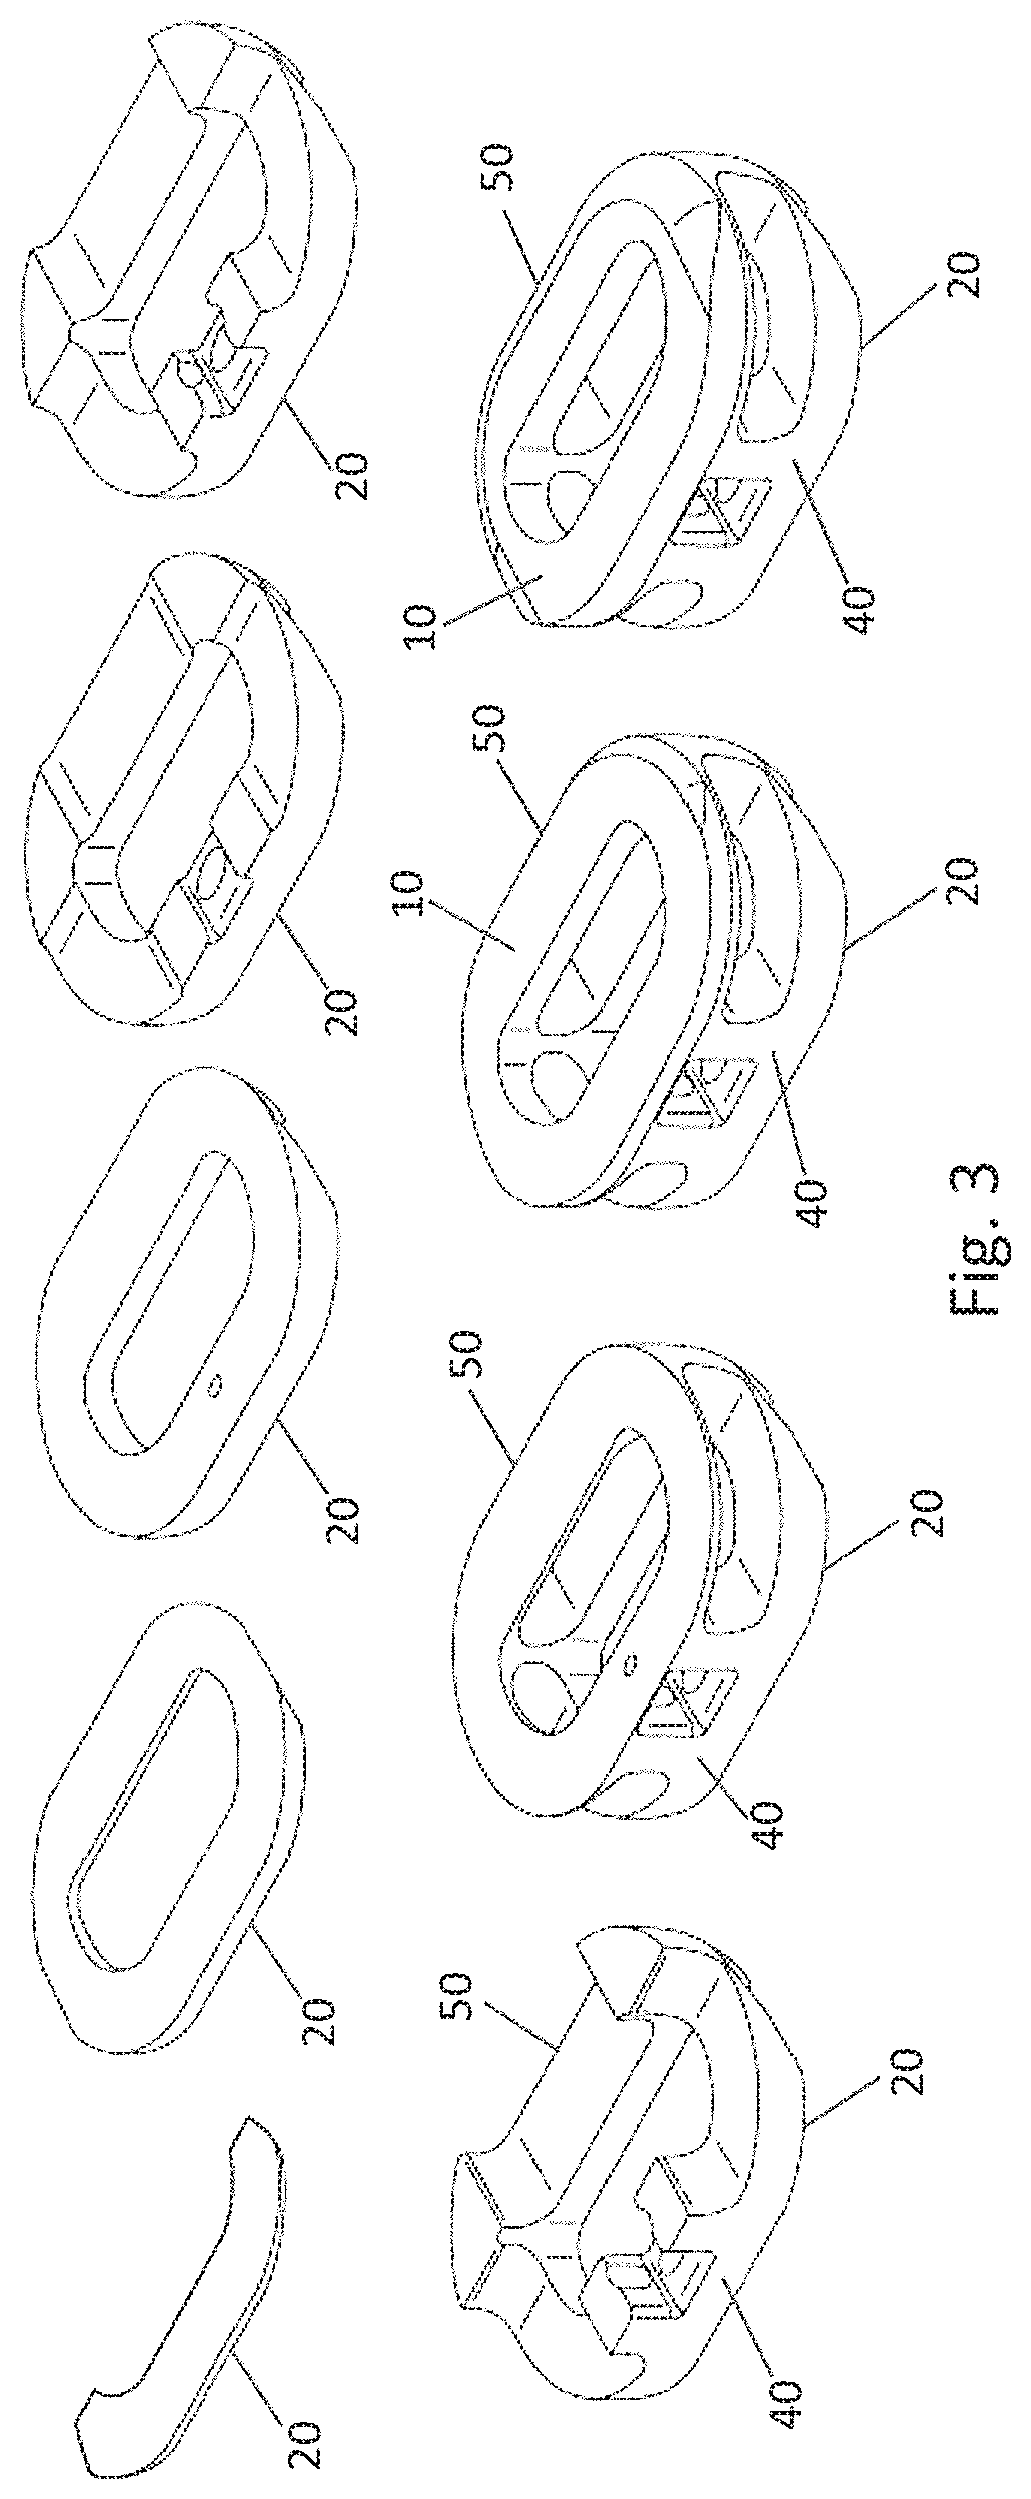 Processes for additively manufacturing orthopedic implants